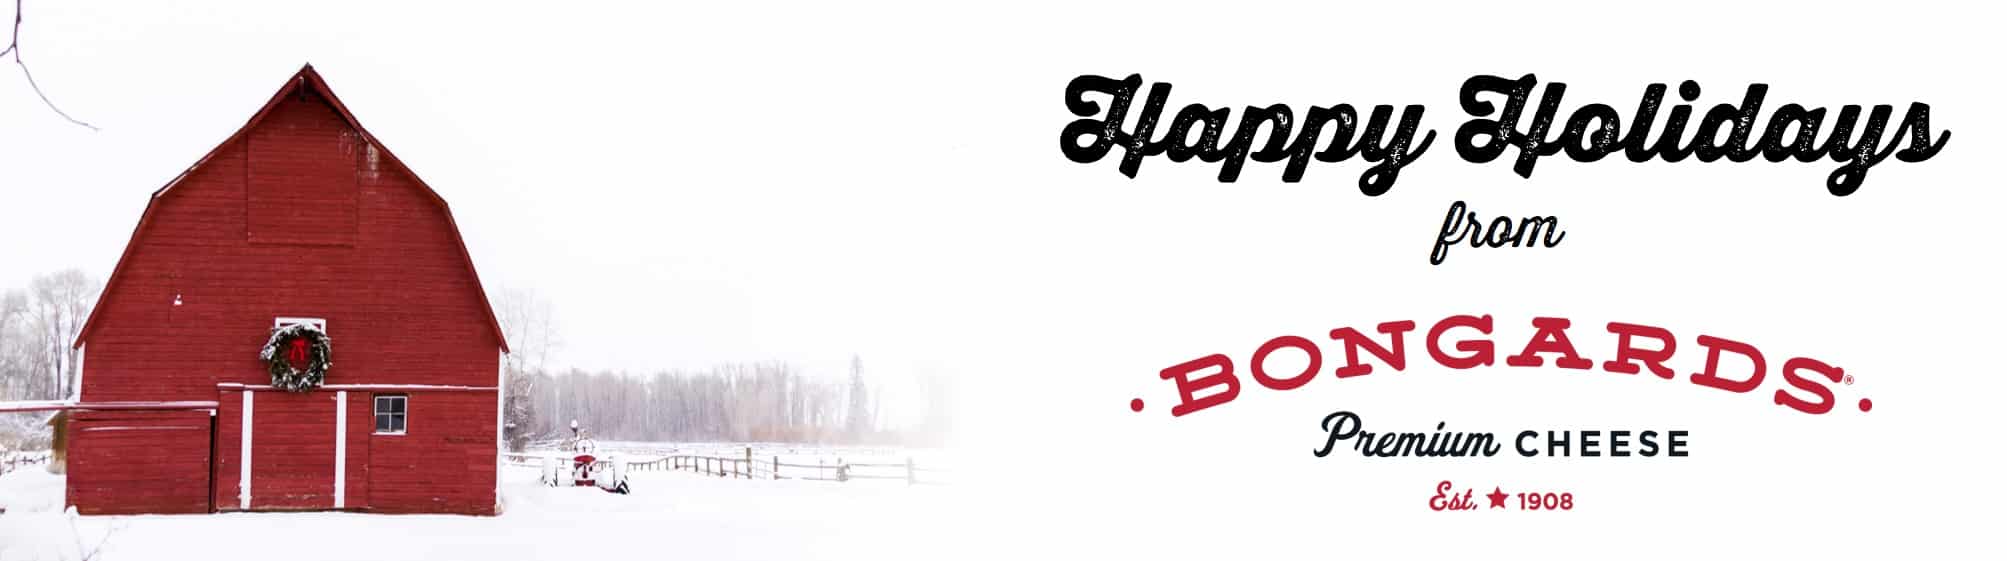 Happy Holidays from Bongards Banner